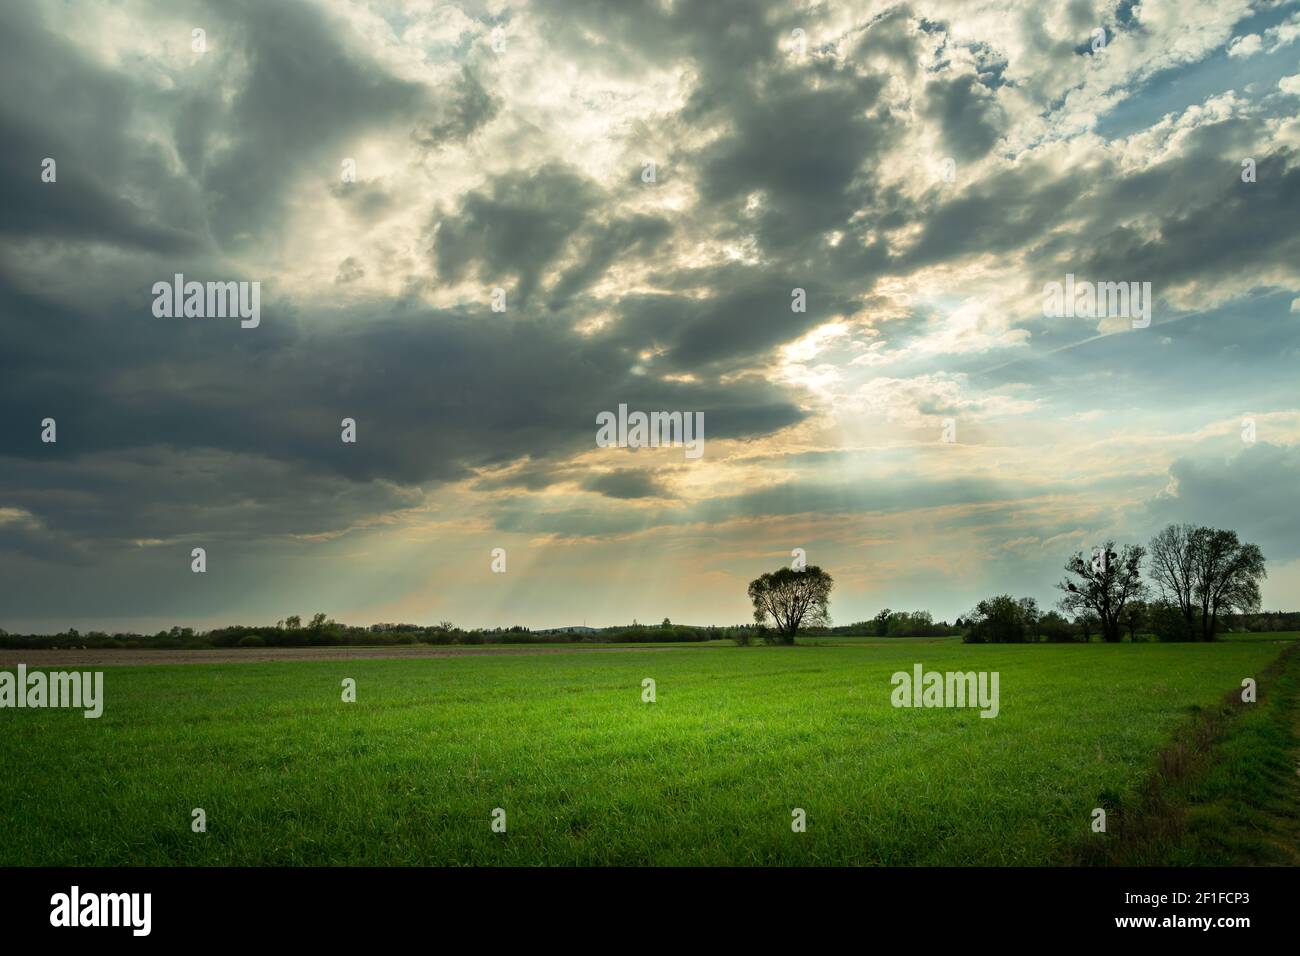 The sun's rays in the cloudy sky over a green field Stock Photo